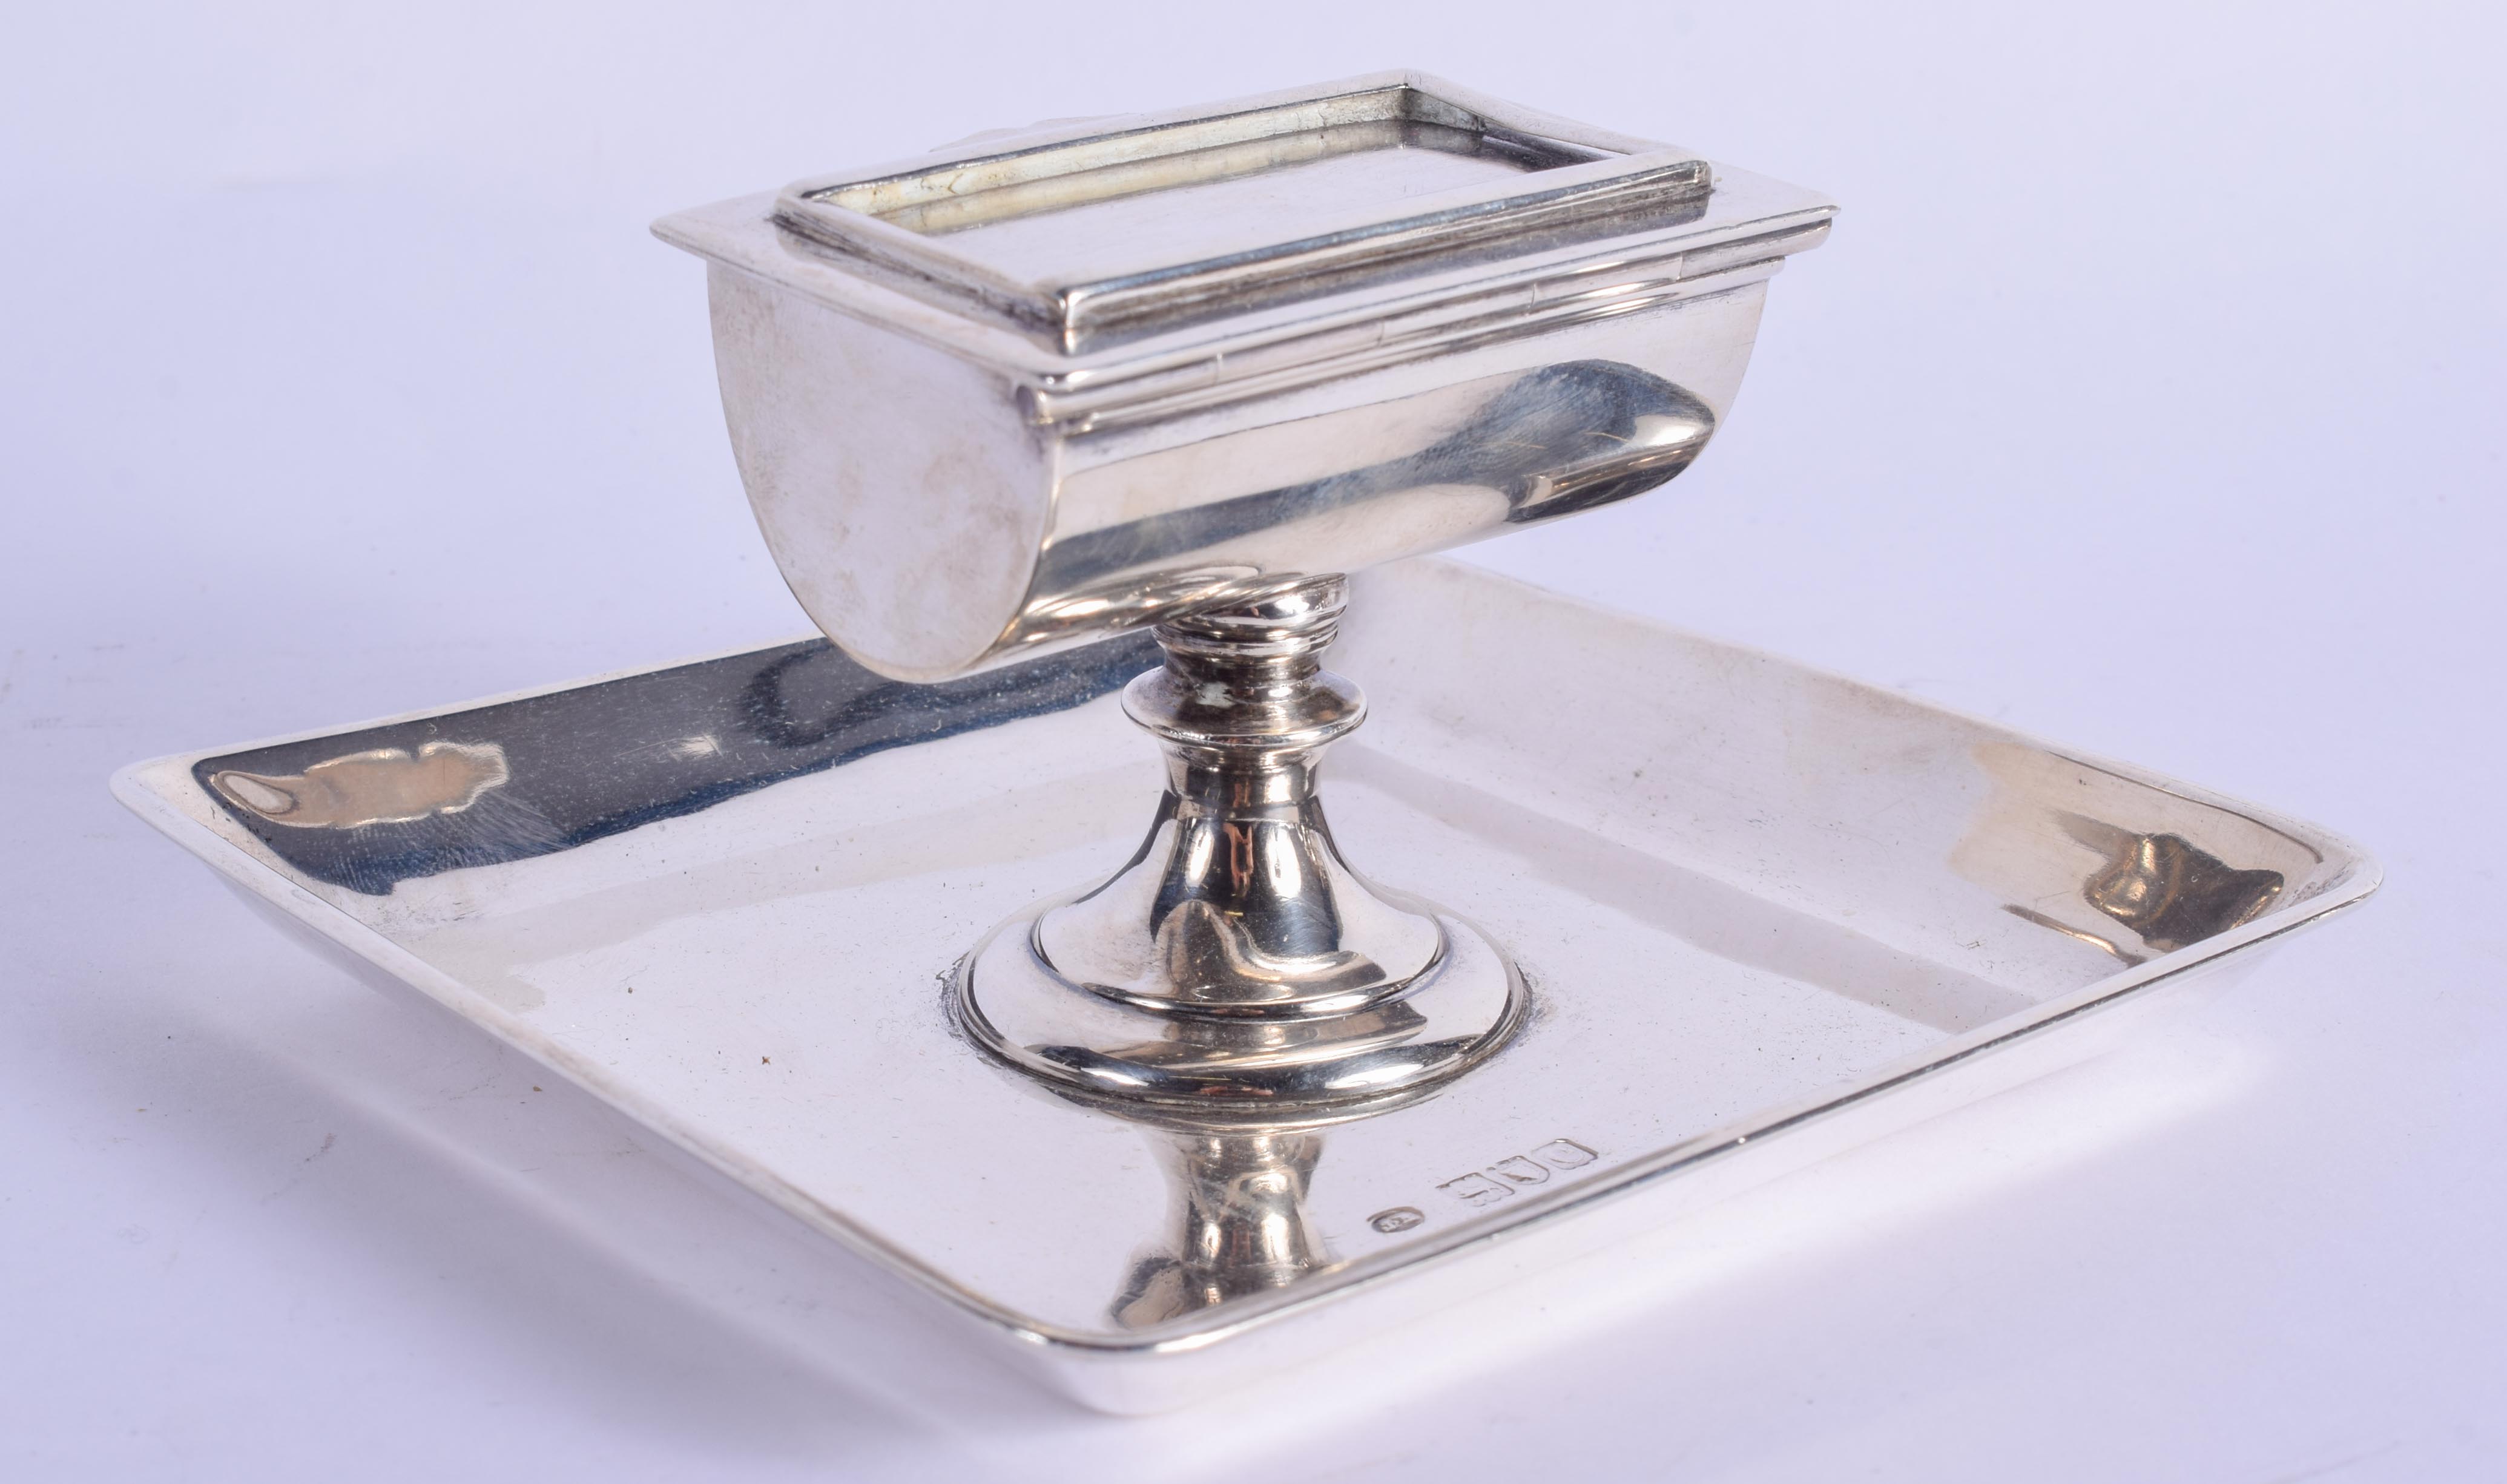 AN EDWARDIAN SILVER DESK STAND. London 1900. 264 grams. 11 cm square. - Image 2 of 5